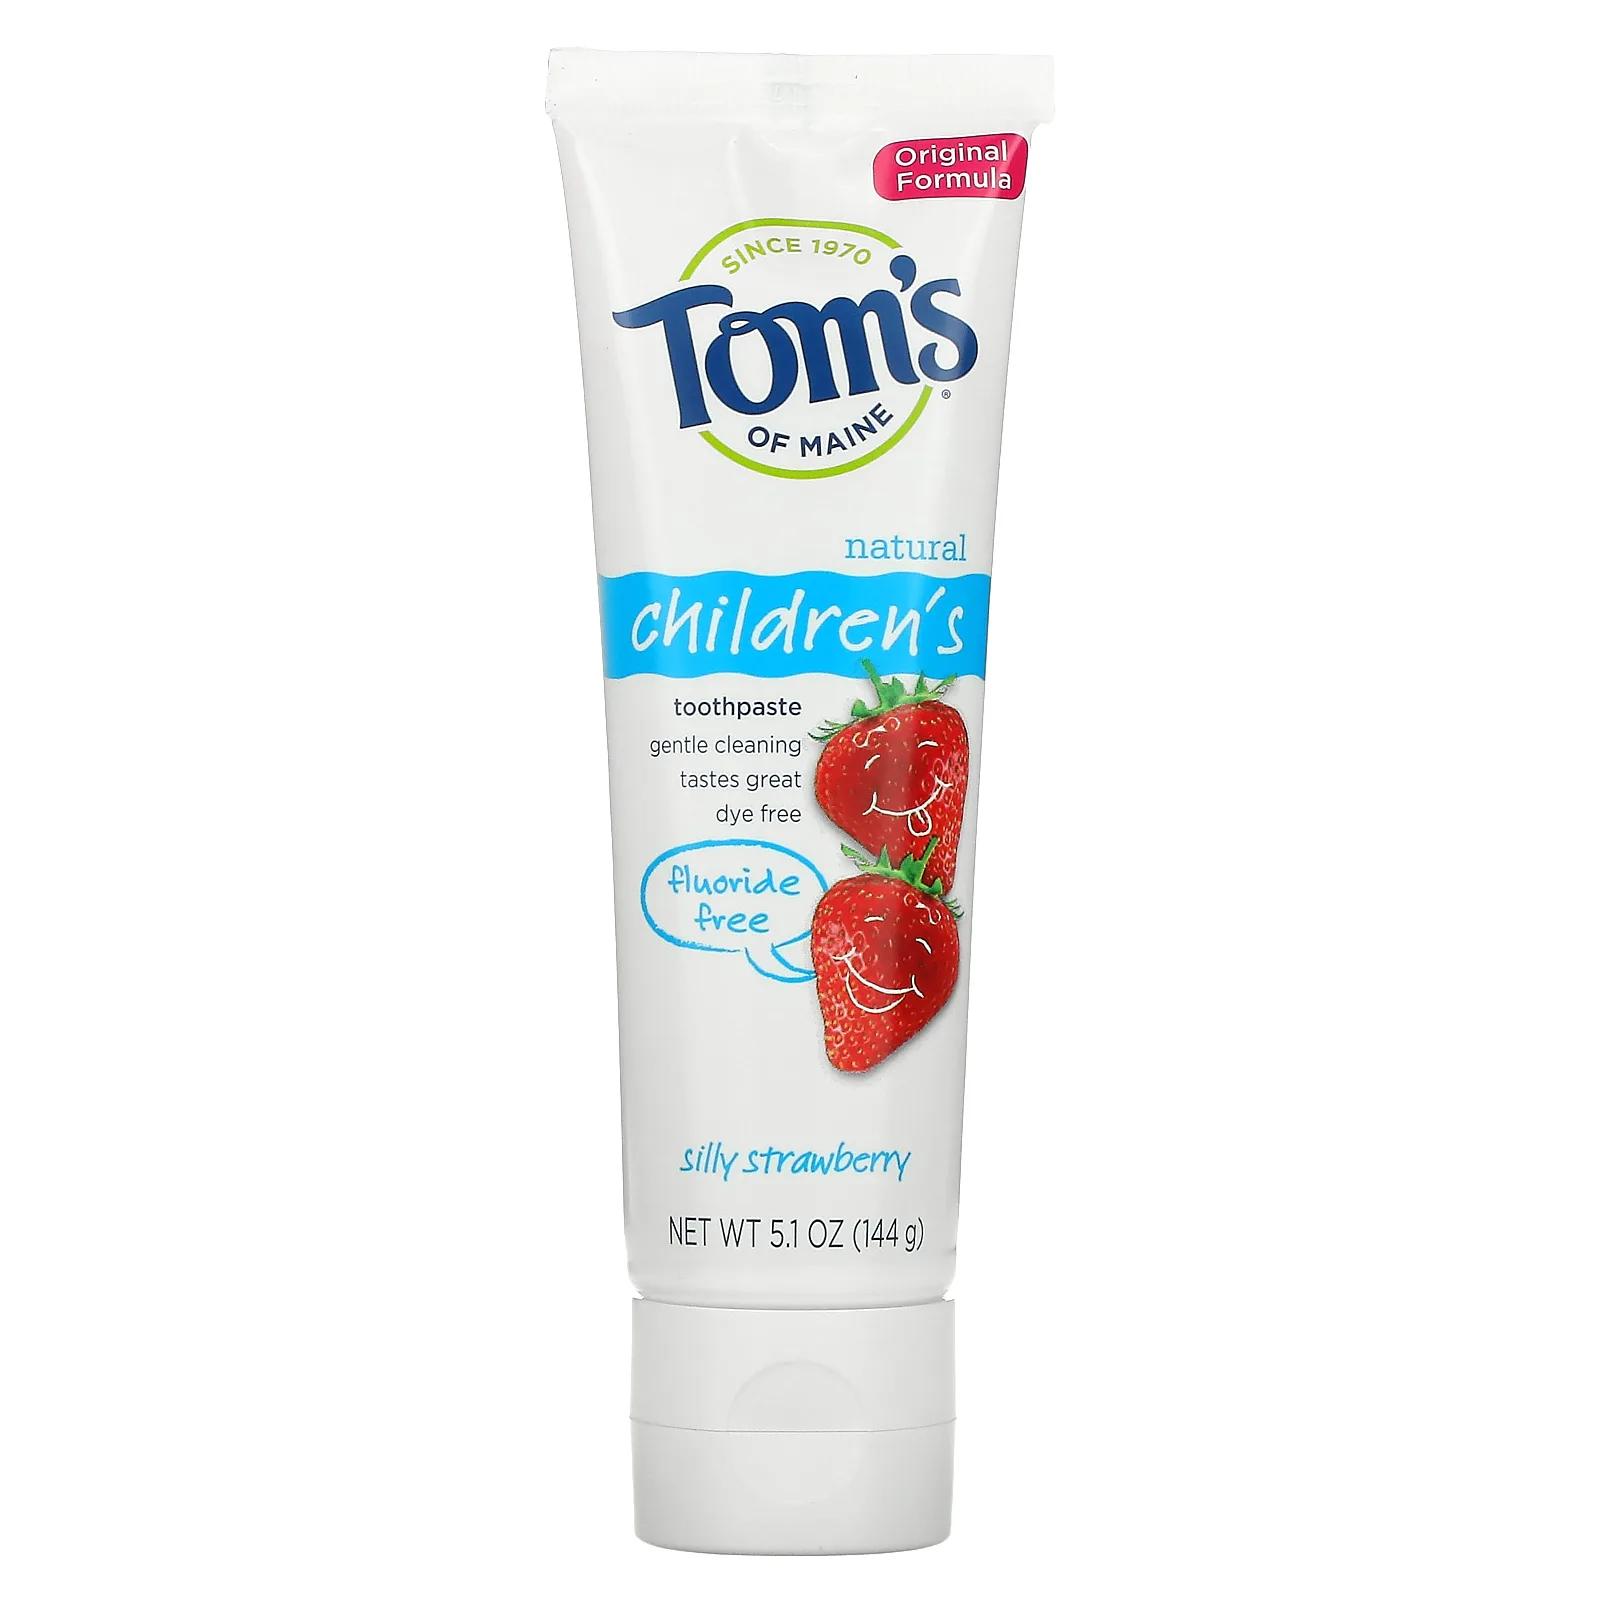 Tom's of Maine Natural Children's Toothpaste Fluoride-Free Silly Strawberry 5.1 oz (144 g)